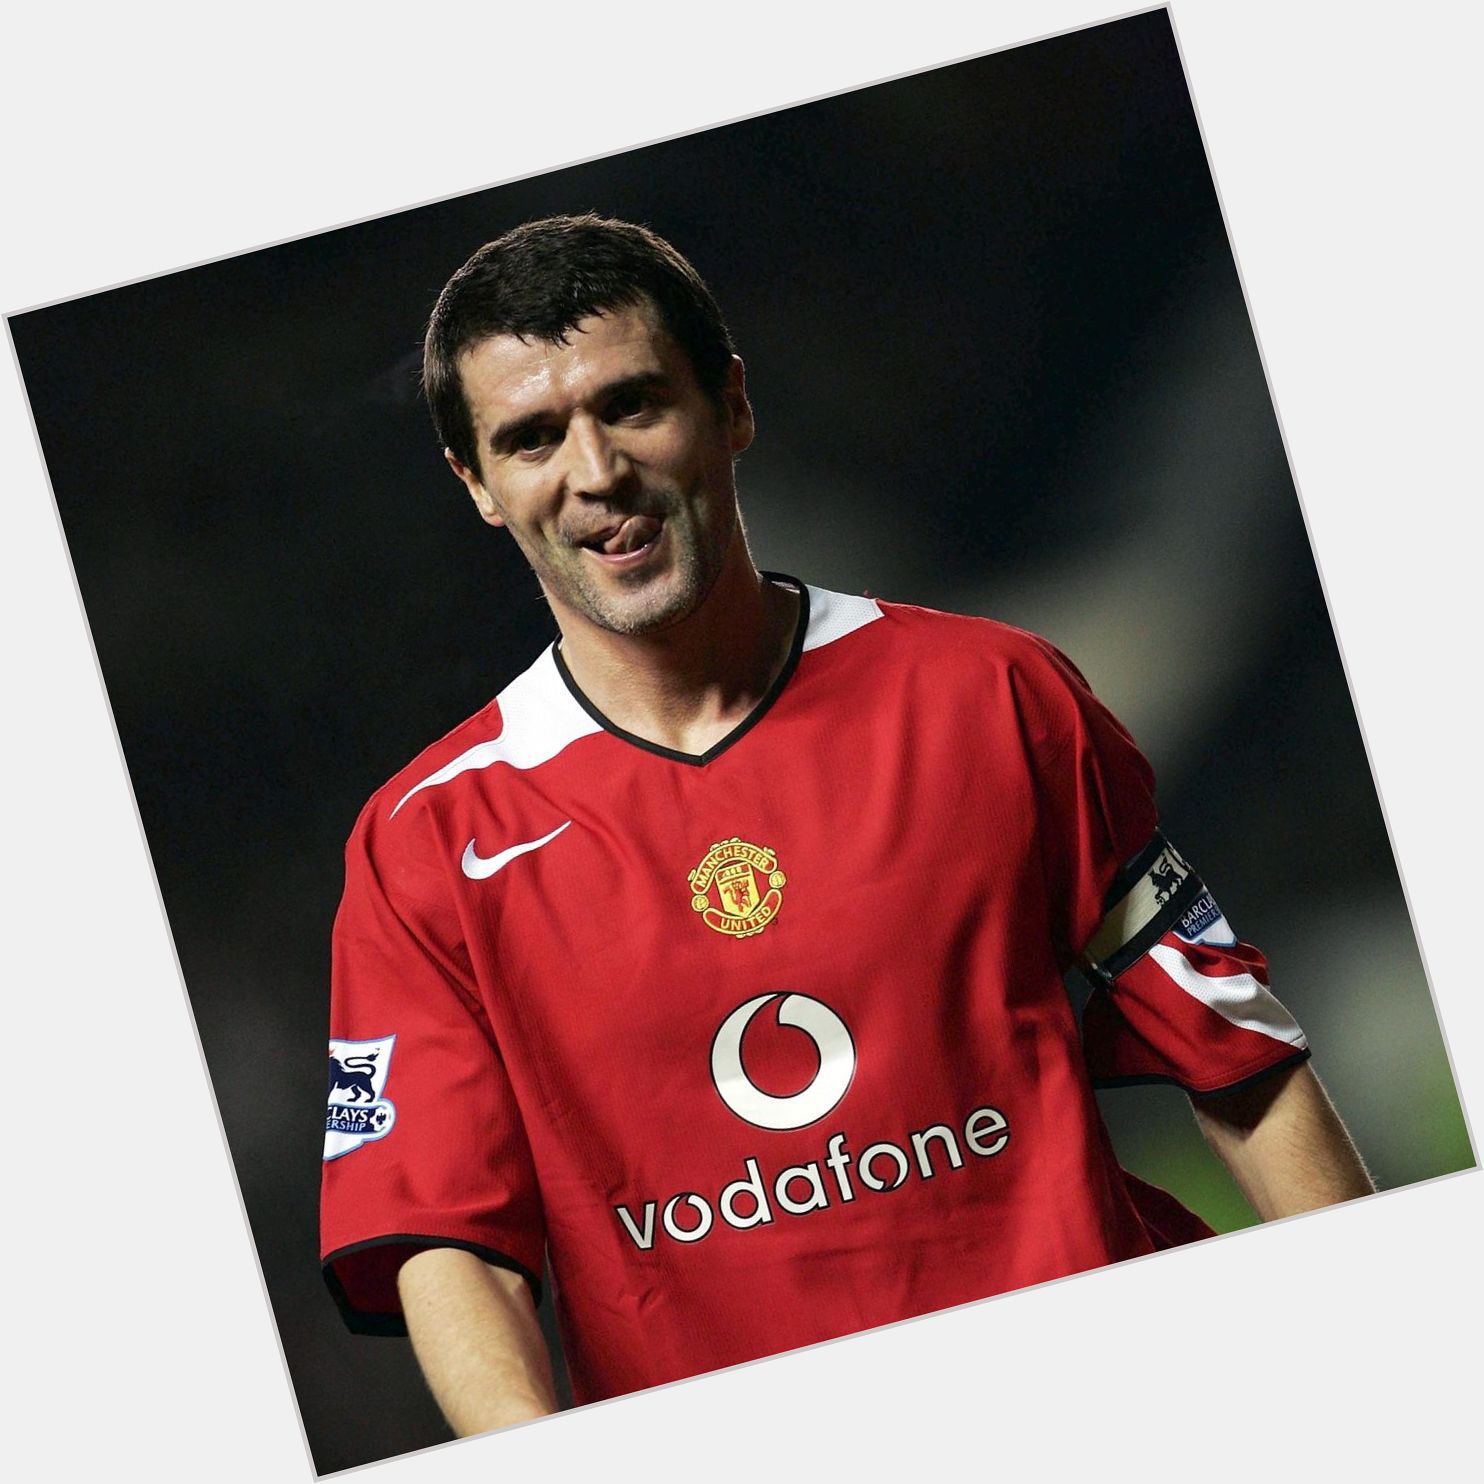 Happy birthday to our own Roy Keane, who turns the big 5-0 today! 